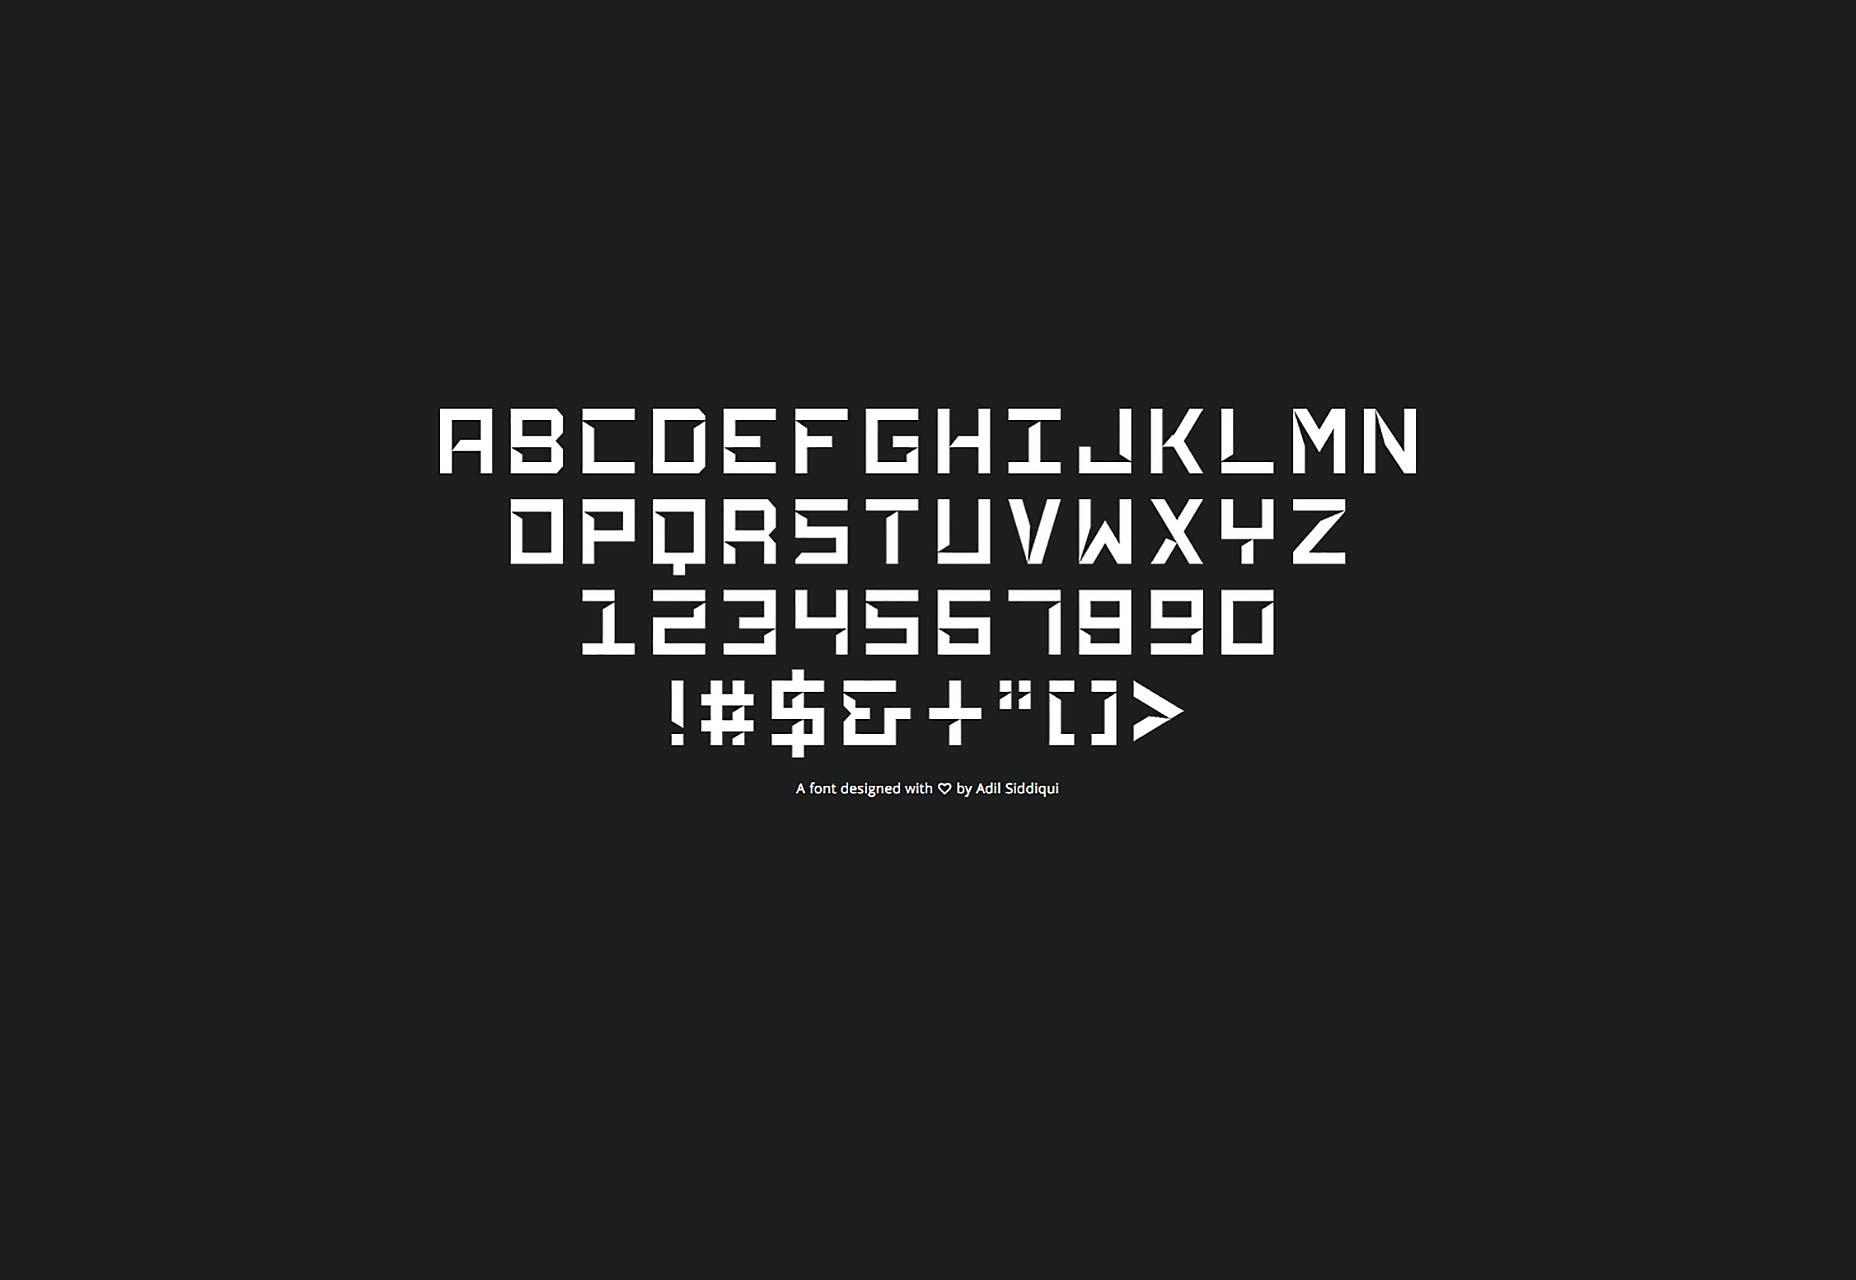 whats the best free font for a logo